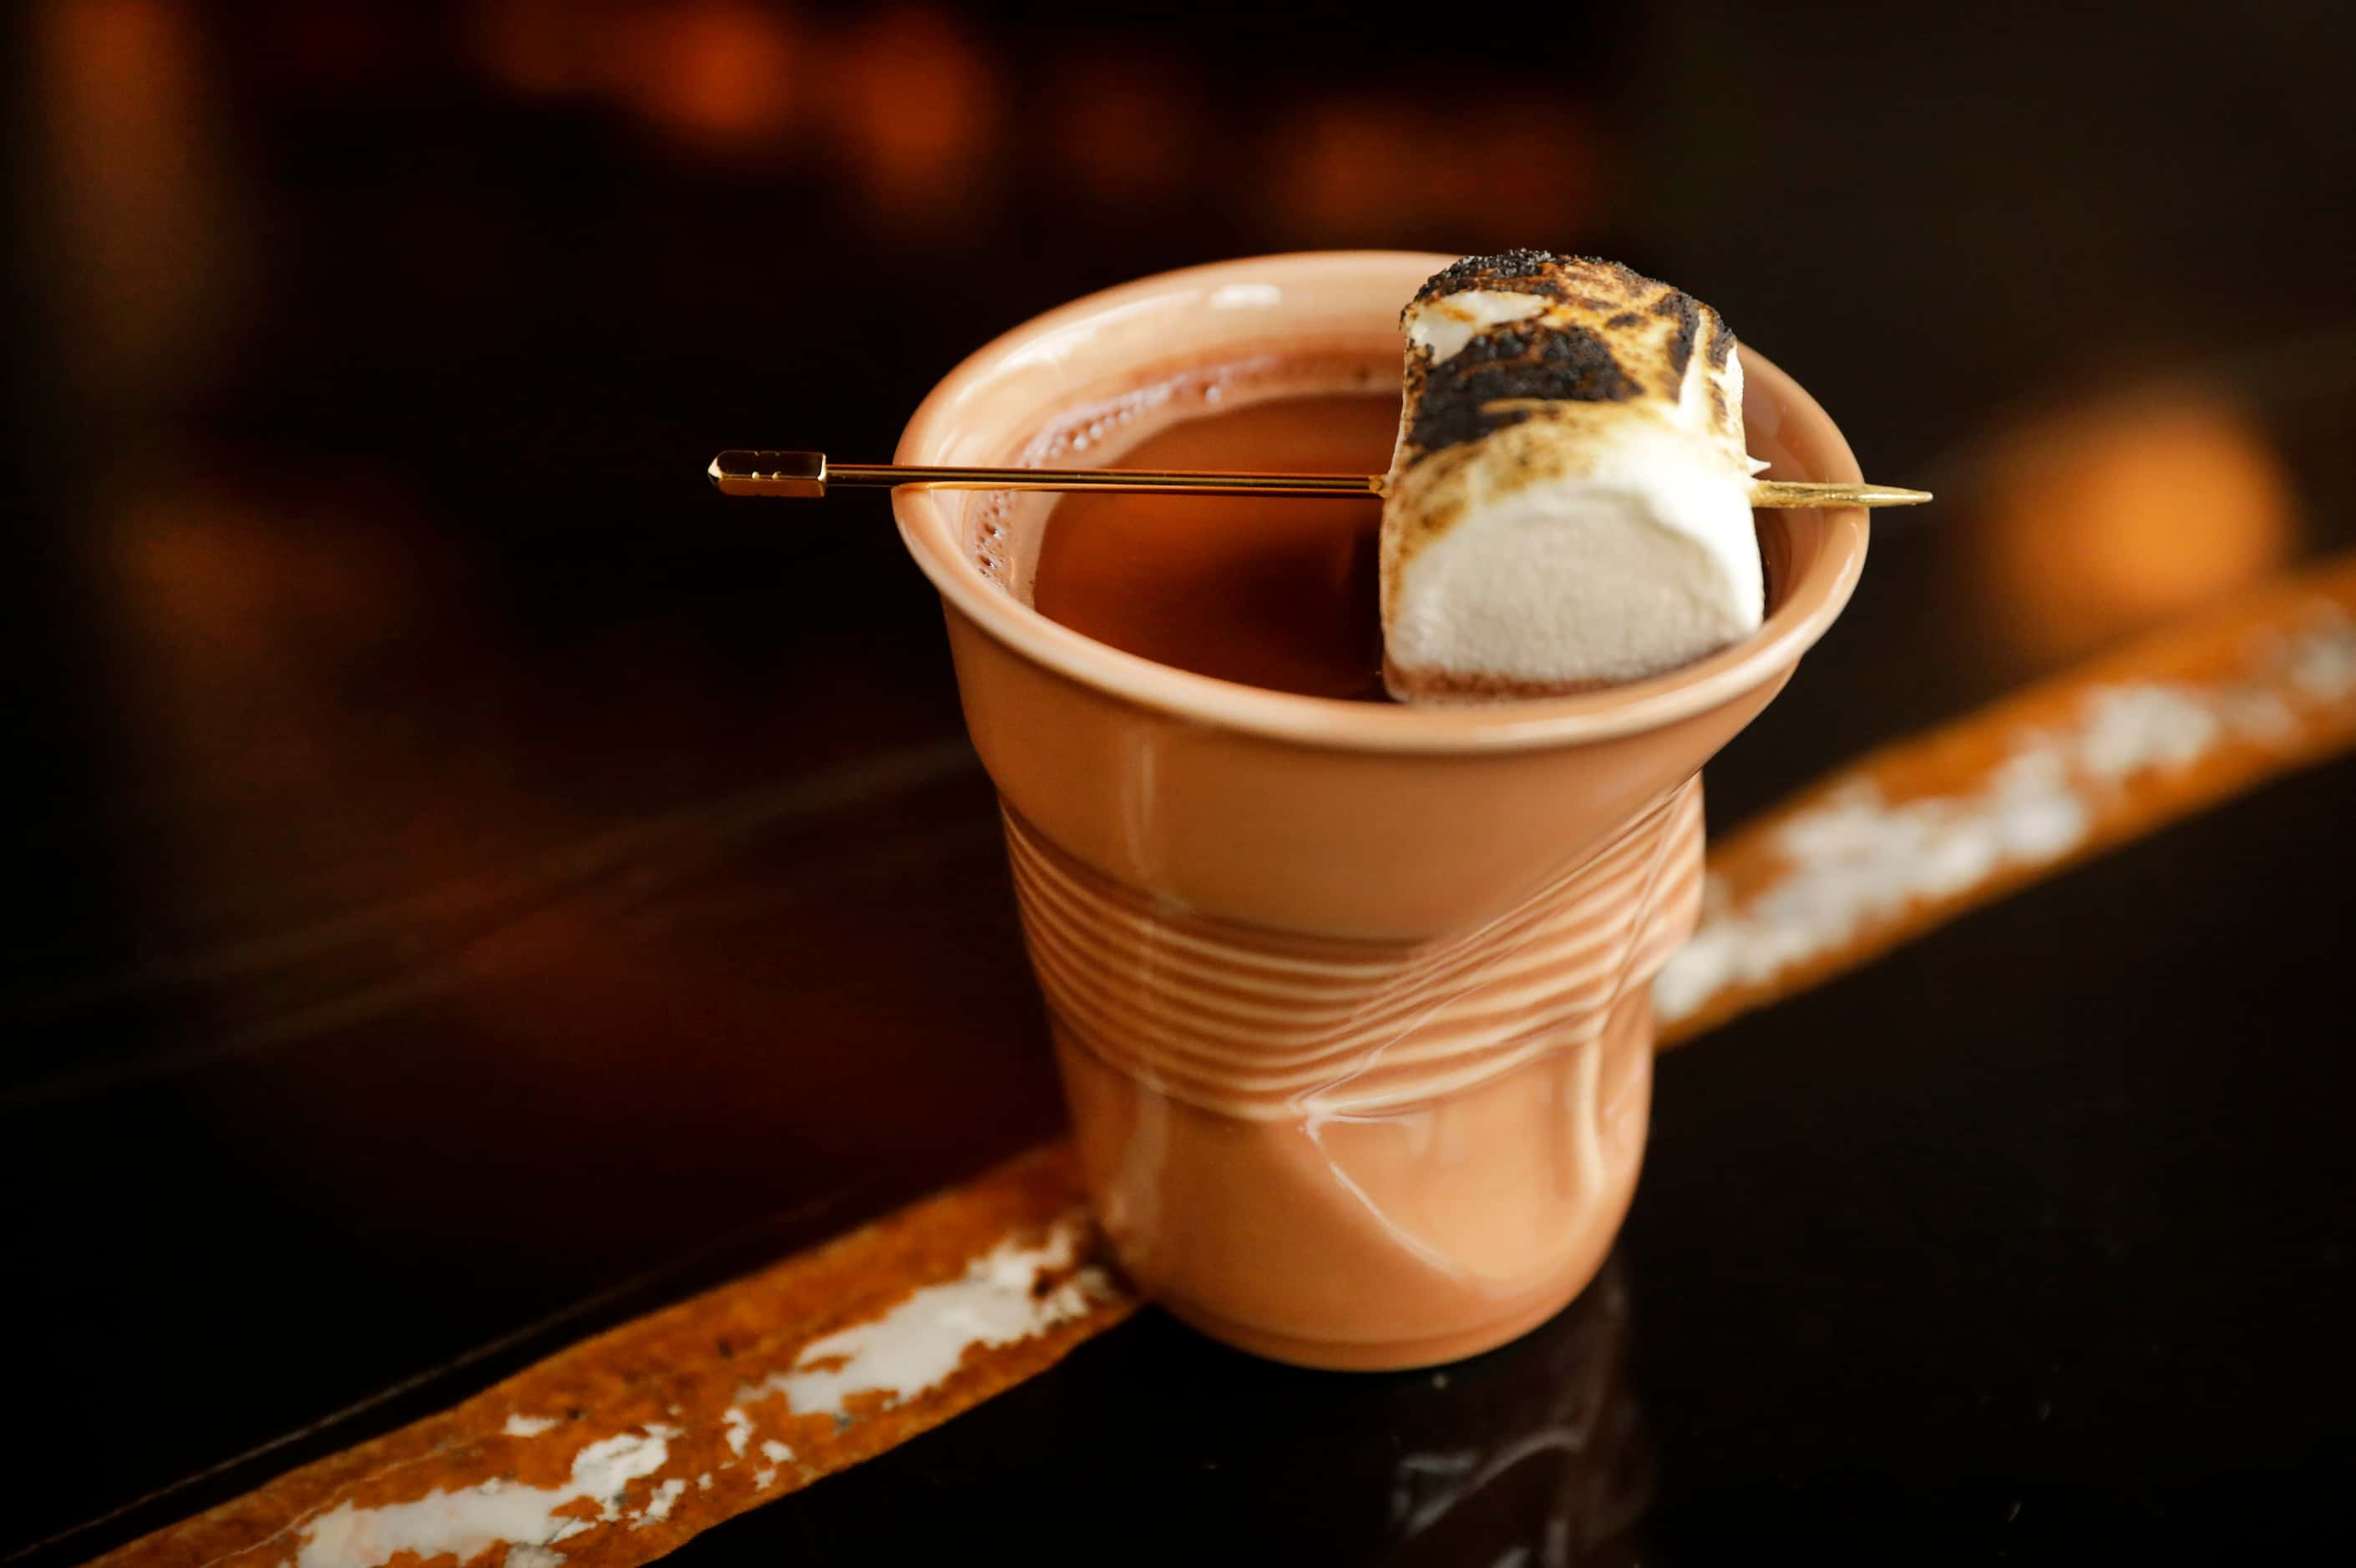 The Chamonix hot chocolate cocktail is made with monk-inspired, in-house chartreuse at Bar...